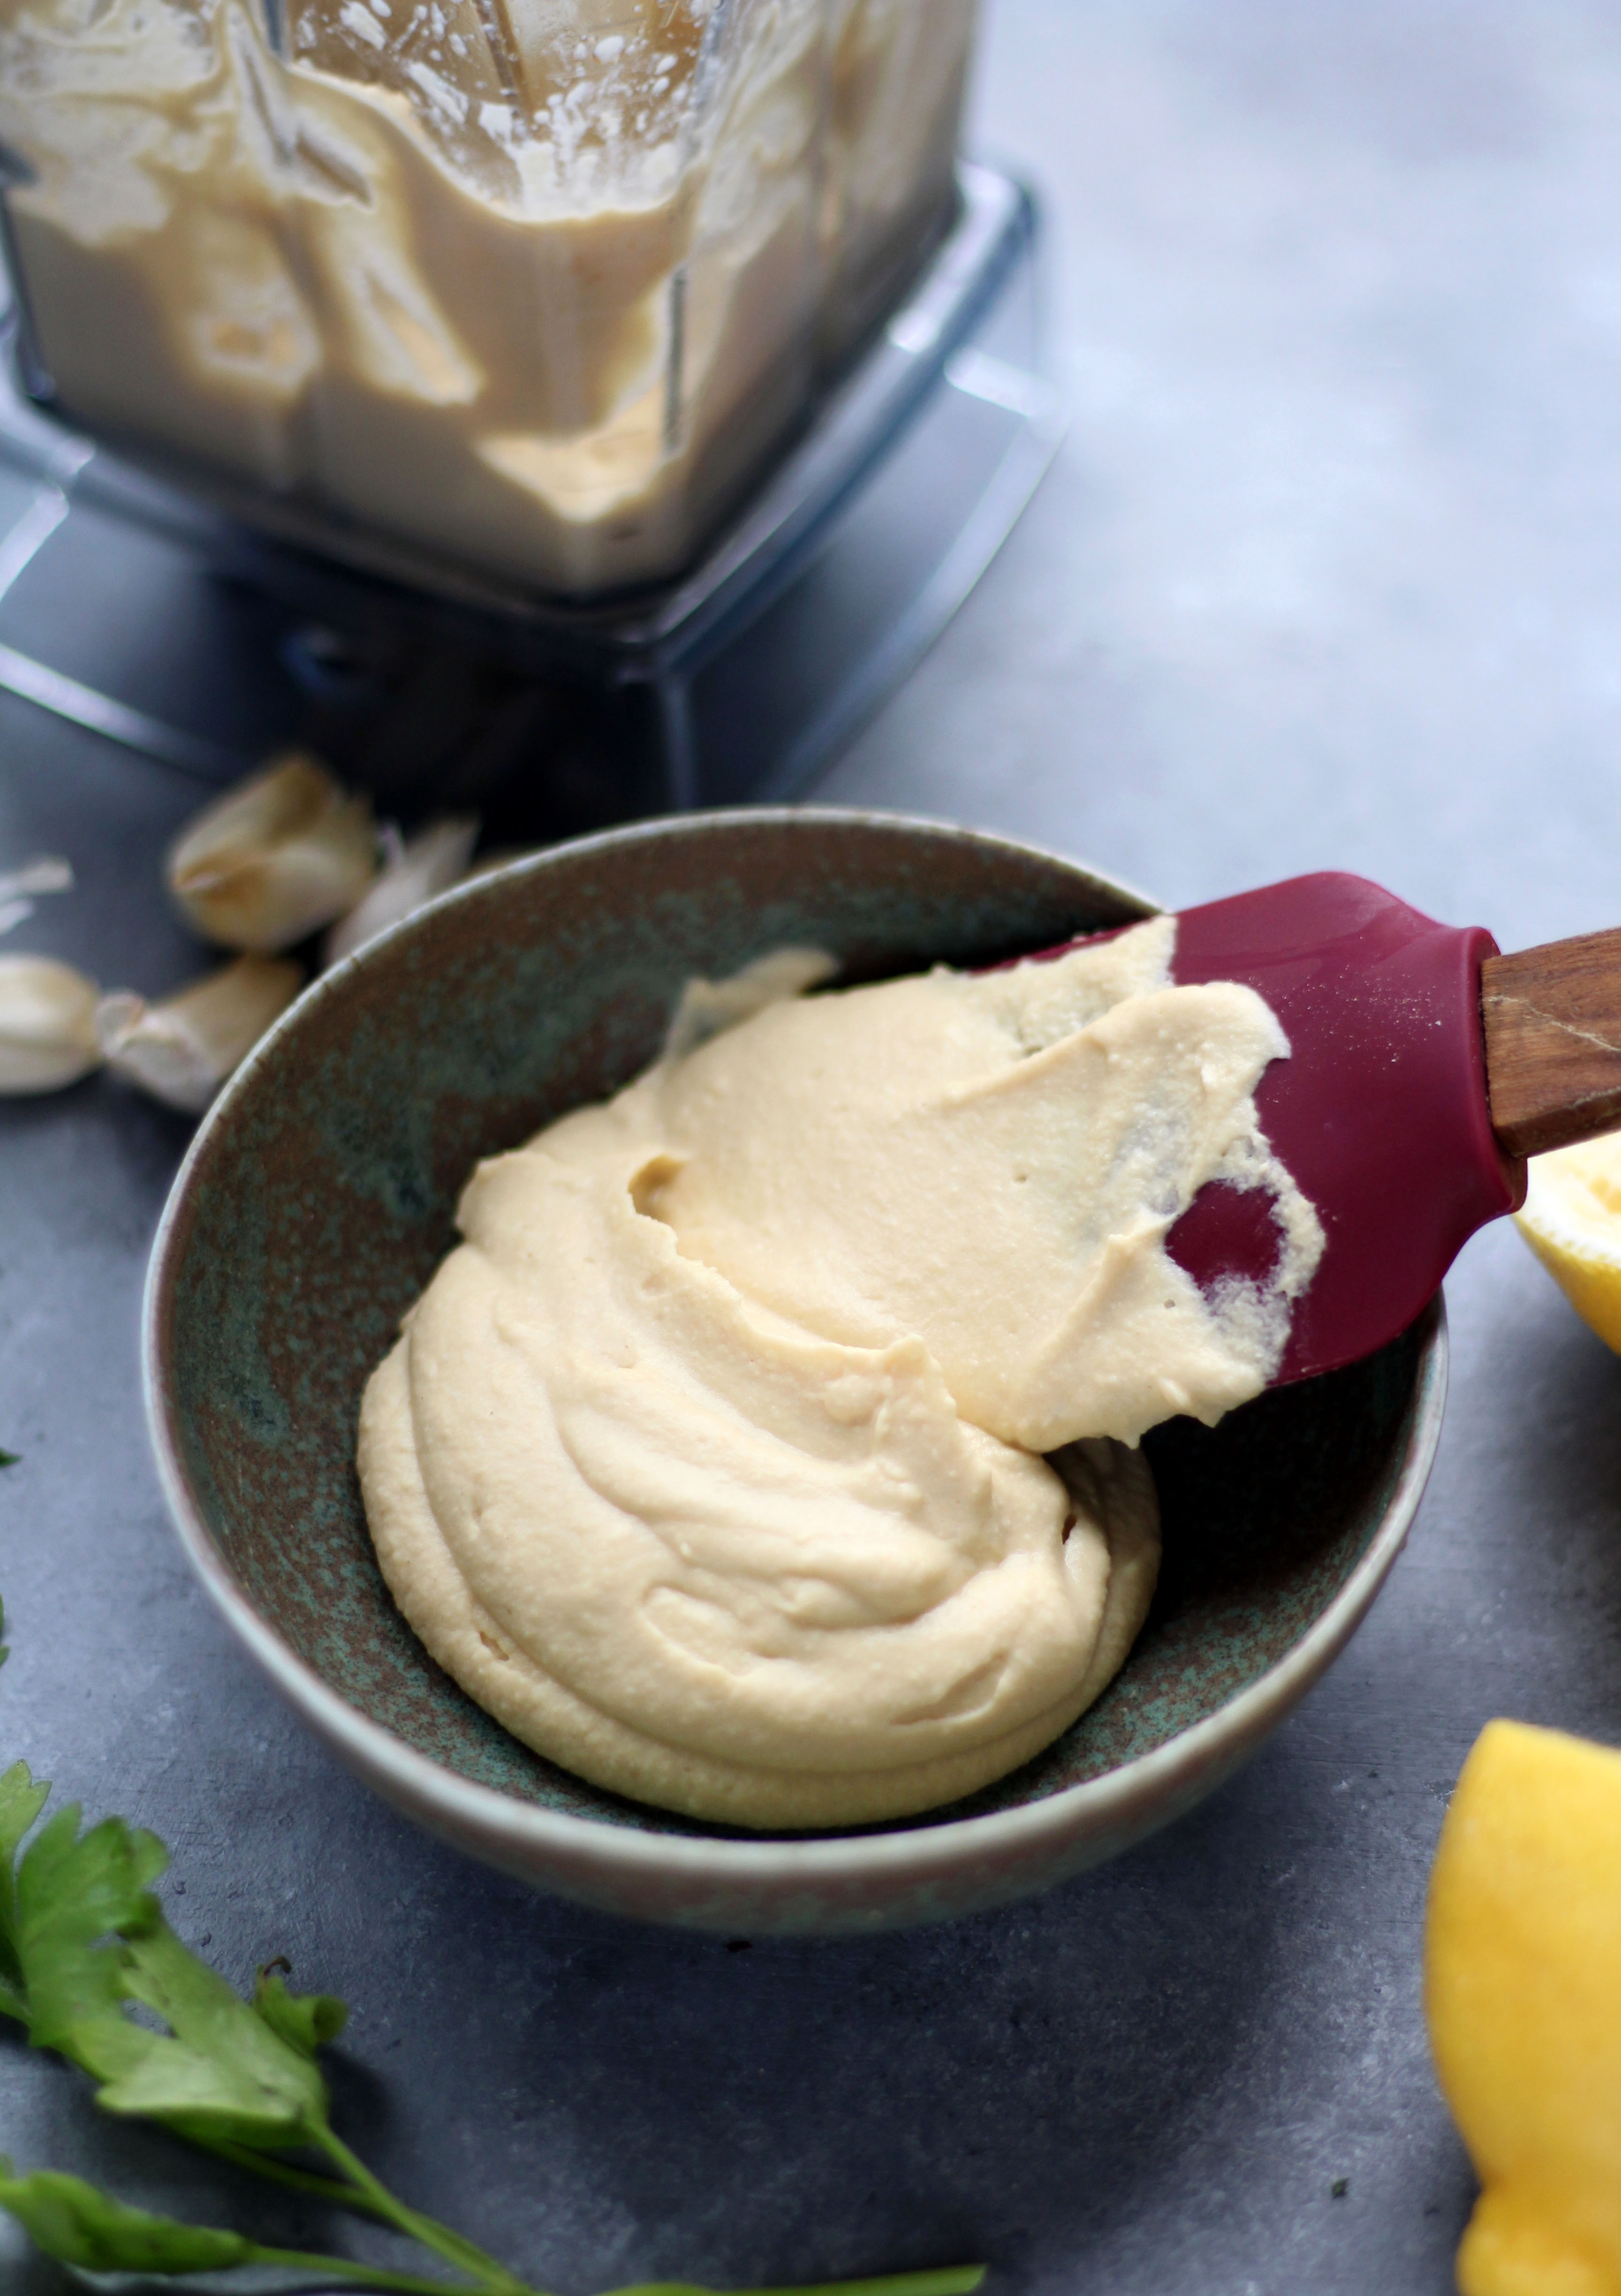 Tips and a recipe for making a smooth and creamy traditional hummus